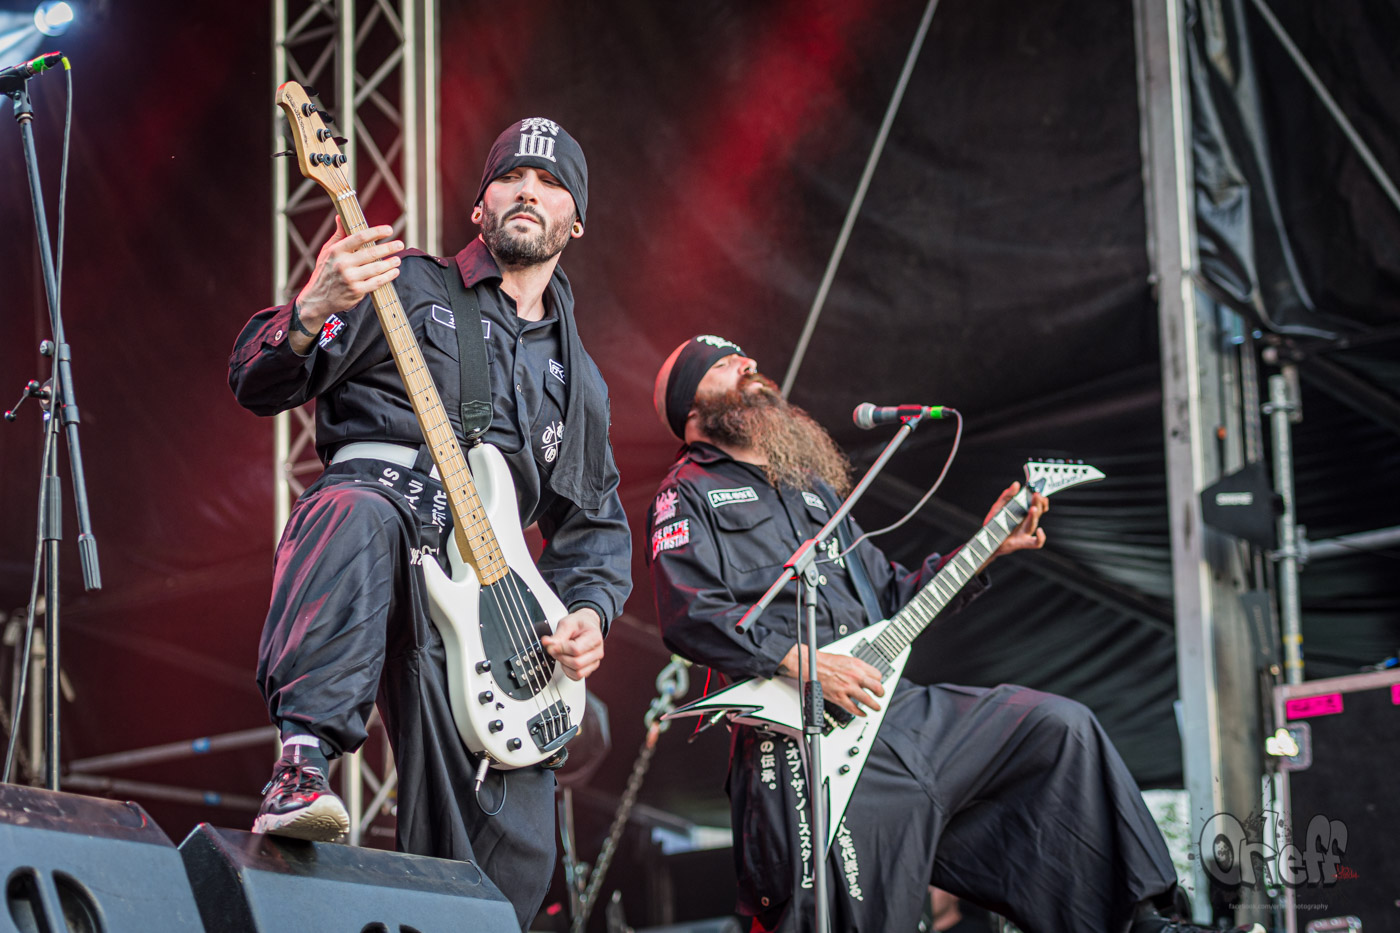 Rise Of The Northstar @ MetalDays Festival 2019